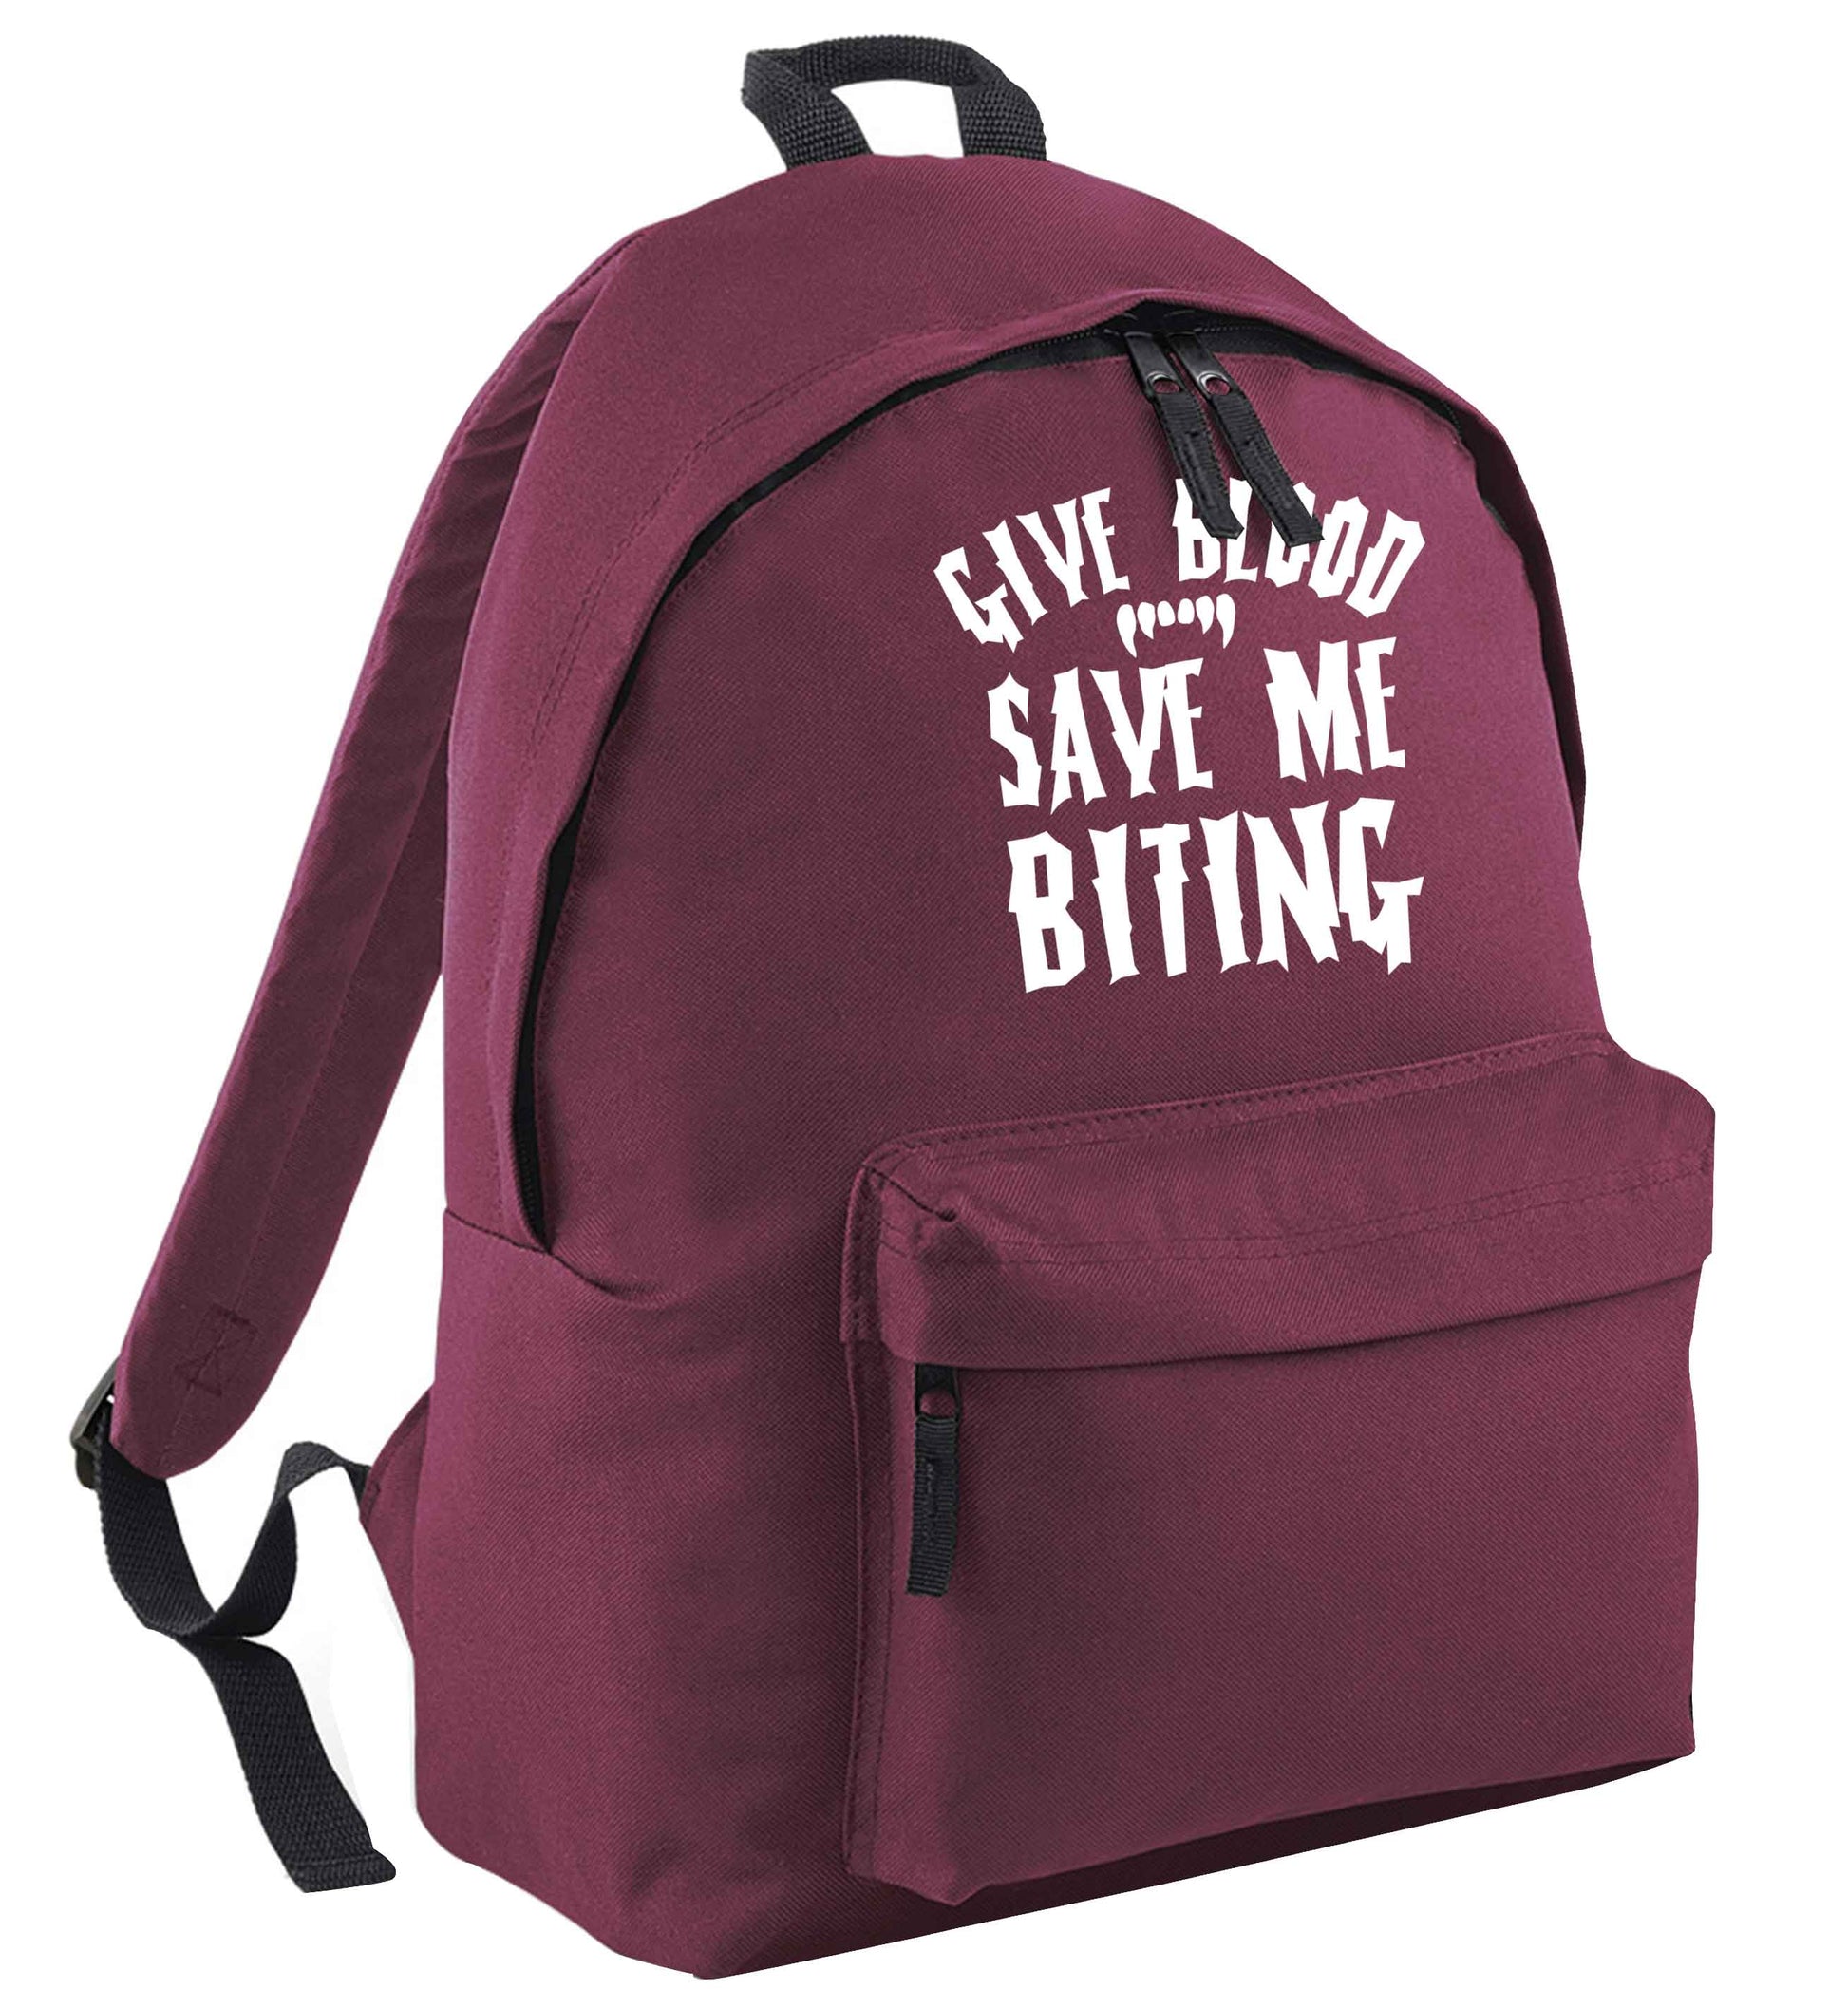 Give blood save me biting maroon adults backpack